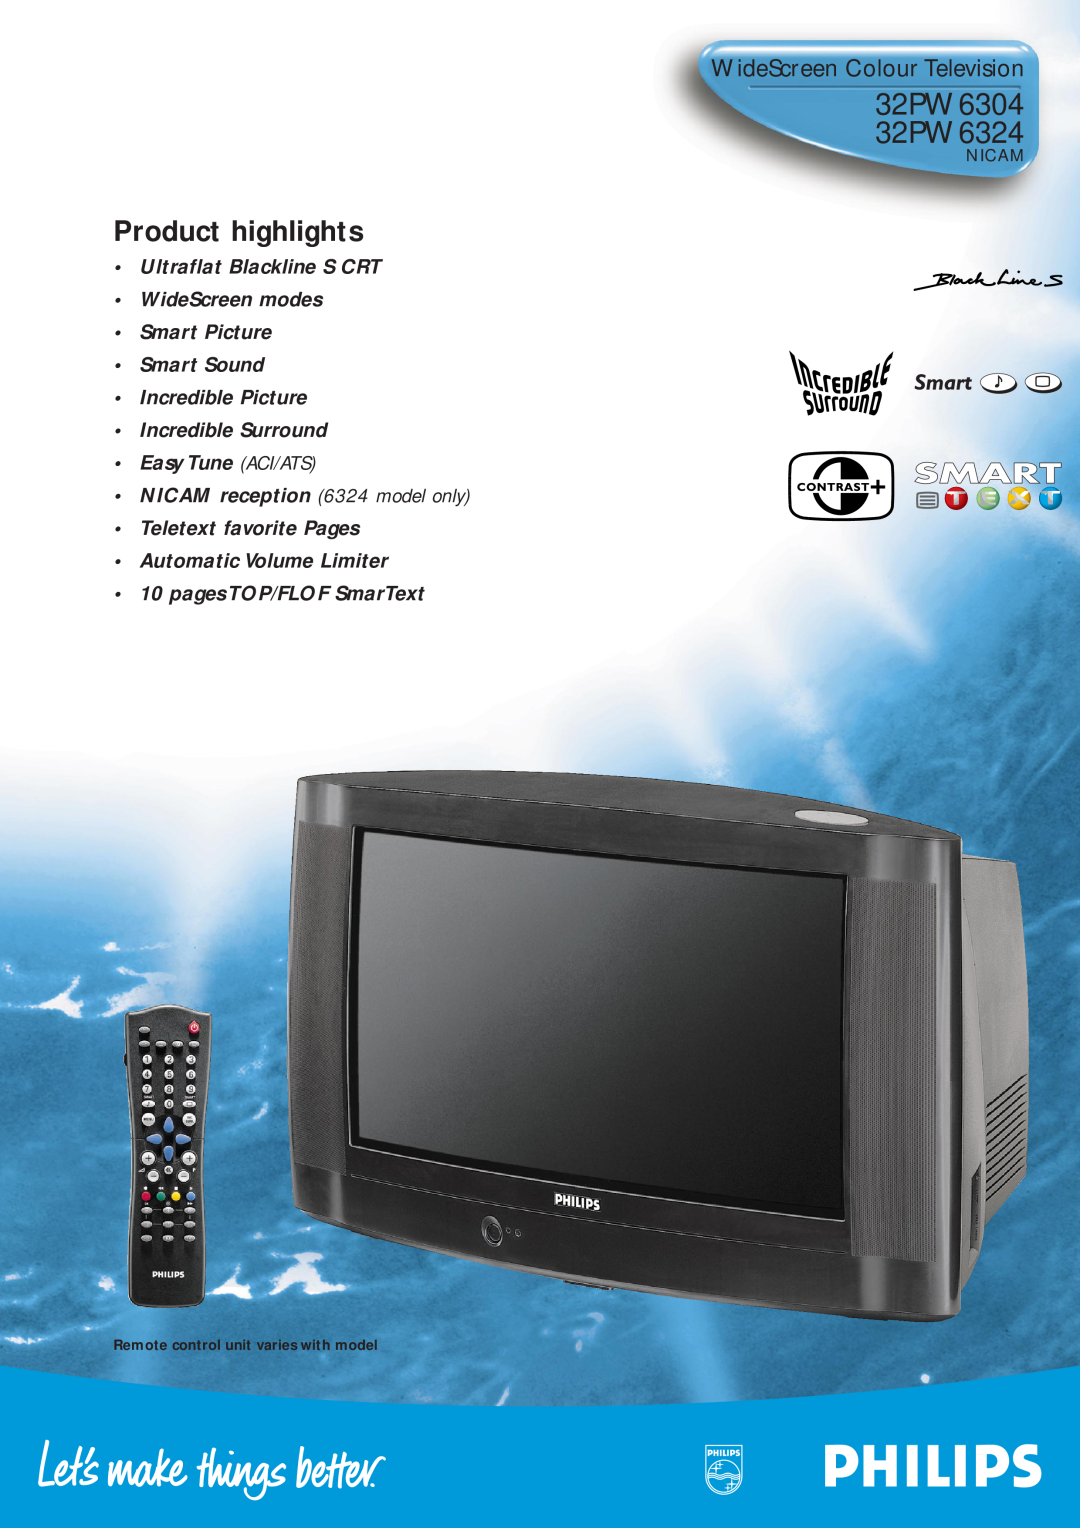 Philips manual 32PW6304 32PW6324, Product highlights, WideScreen Colour Television, Nicam 